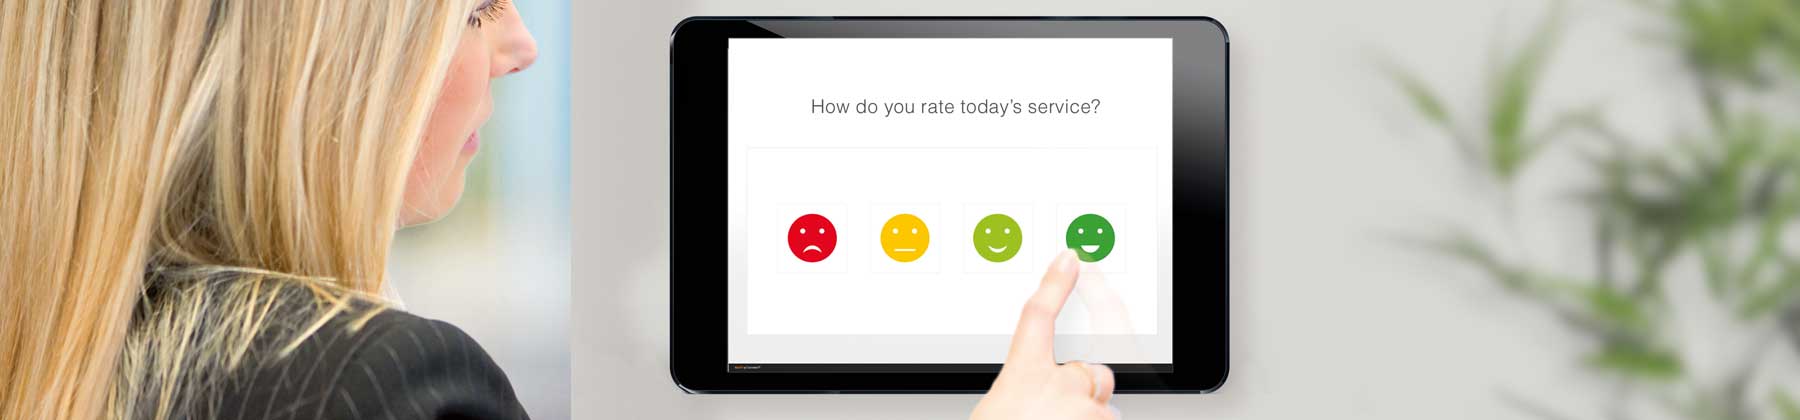 emoticon instant survey on wall touch display